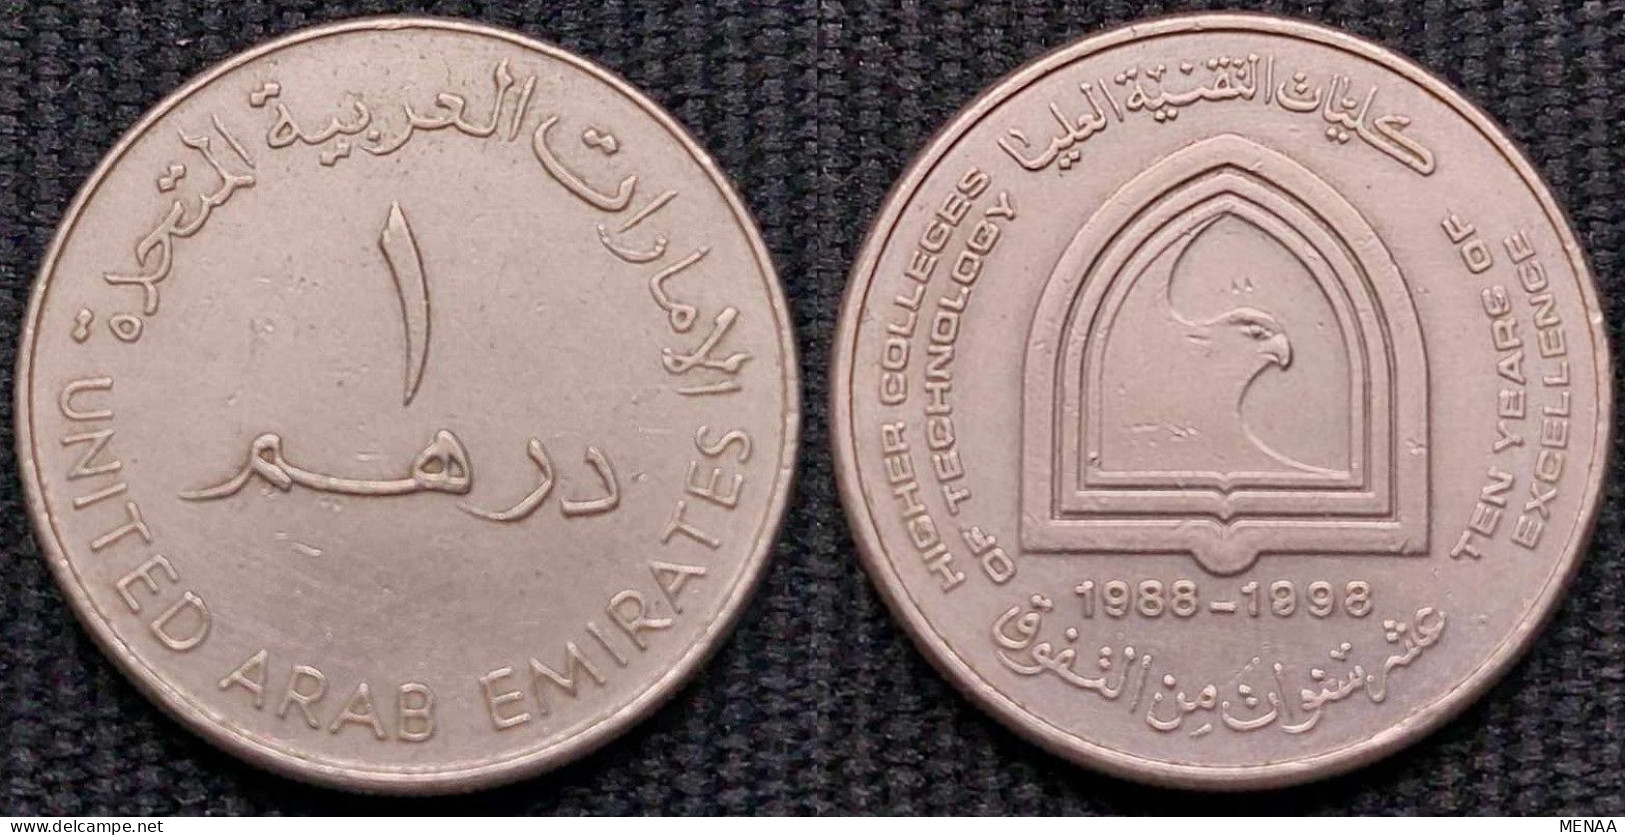 United Arab Emirates - 1 Dirham -1998 - The 10th Anniversary Of The Higher Colleges Of Technology-  - KM 35 - United Arab Emirates